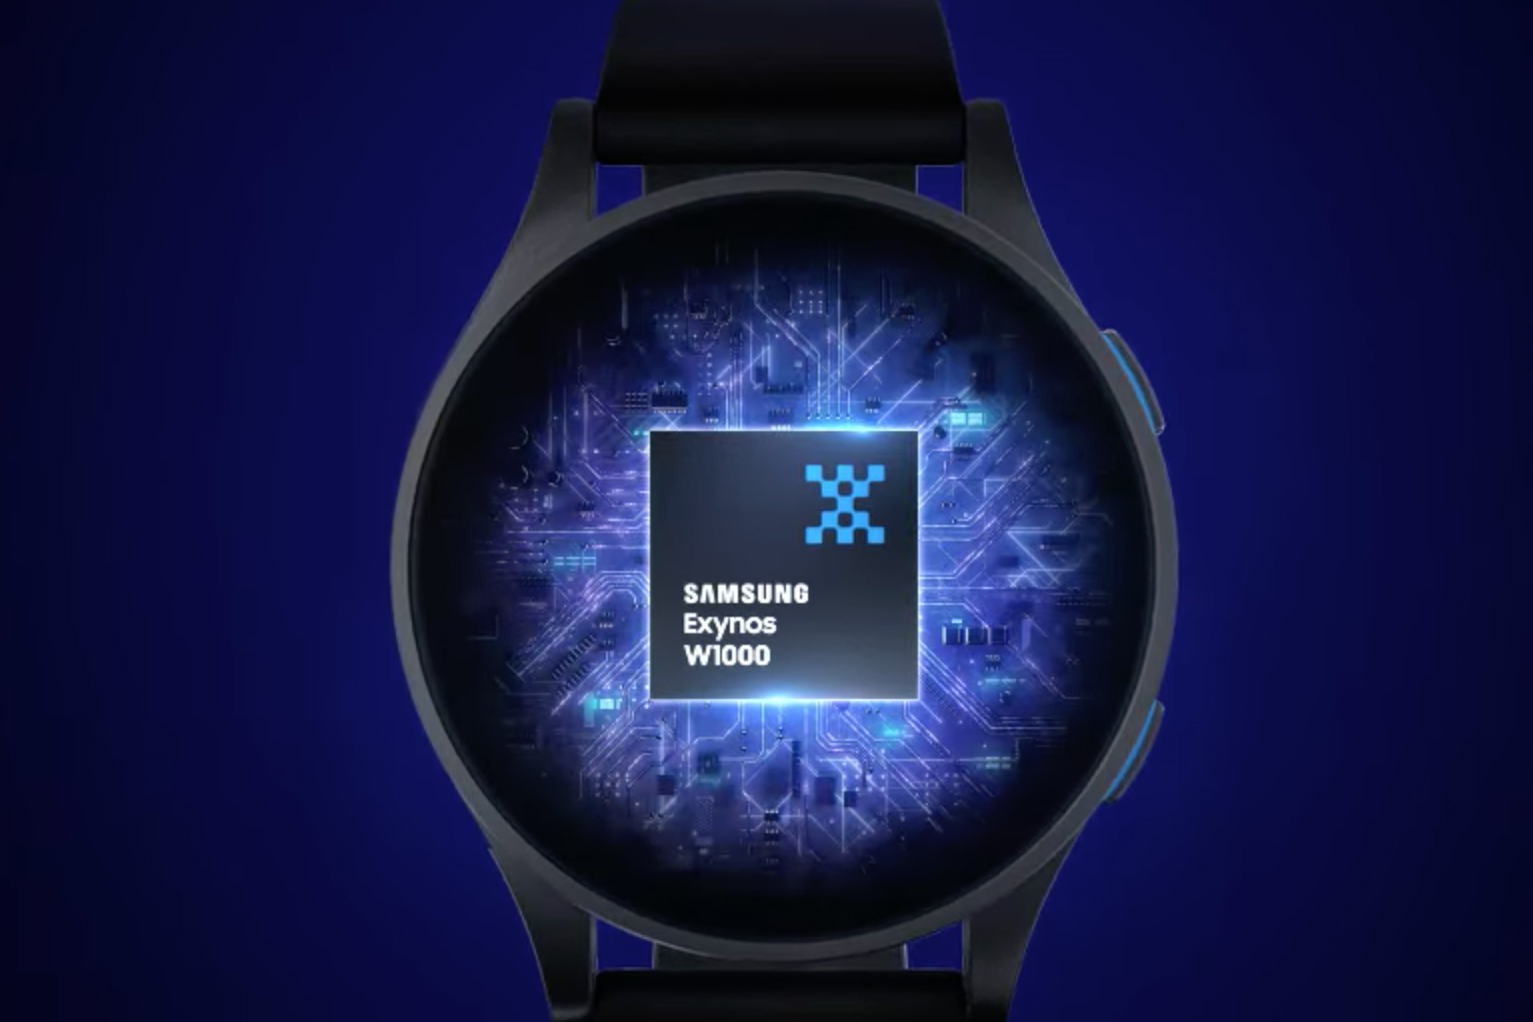 Samsung Exynos W1000 chip for the Galaxy Watch 7 and Ultra